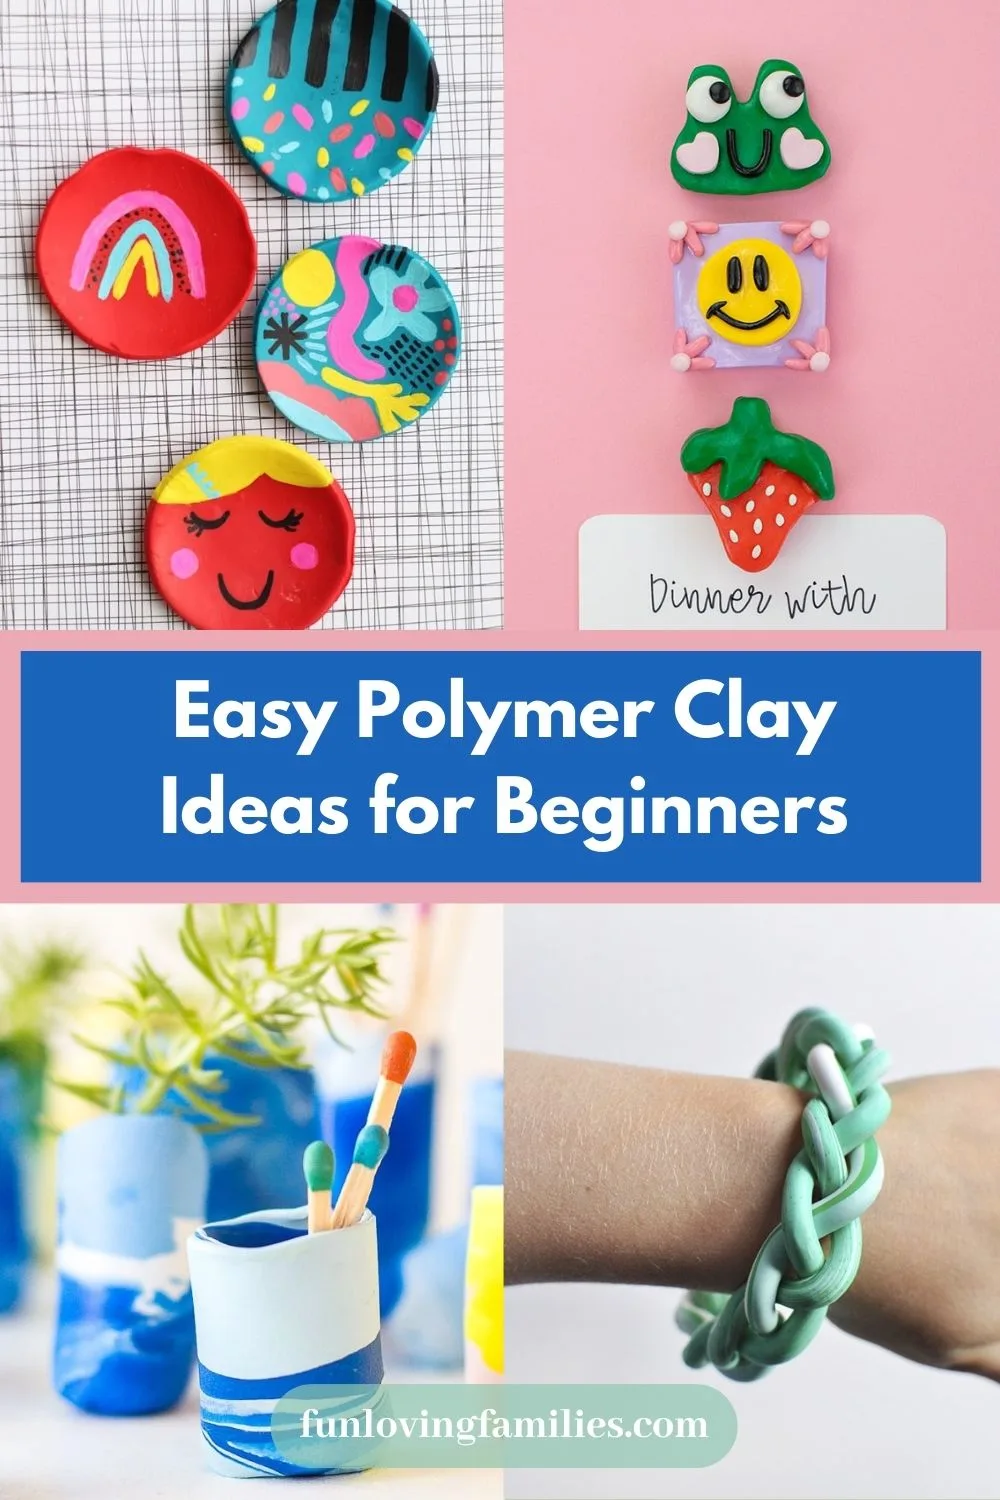 Easy Polymer Clay Ideas for Beginners